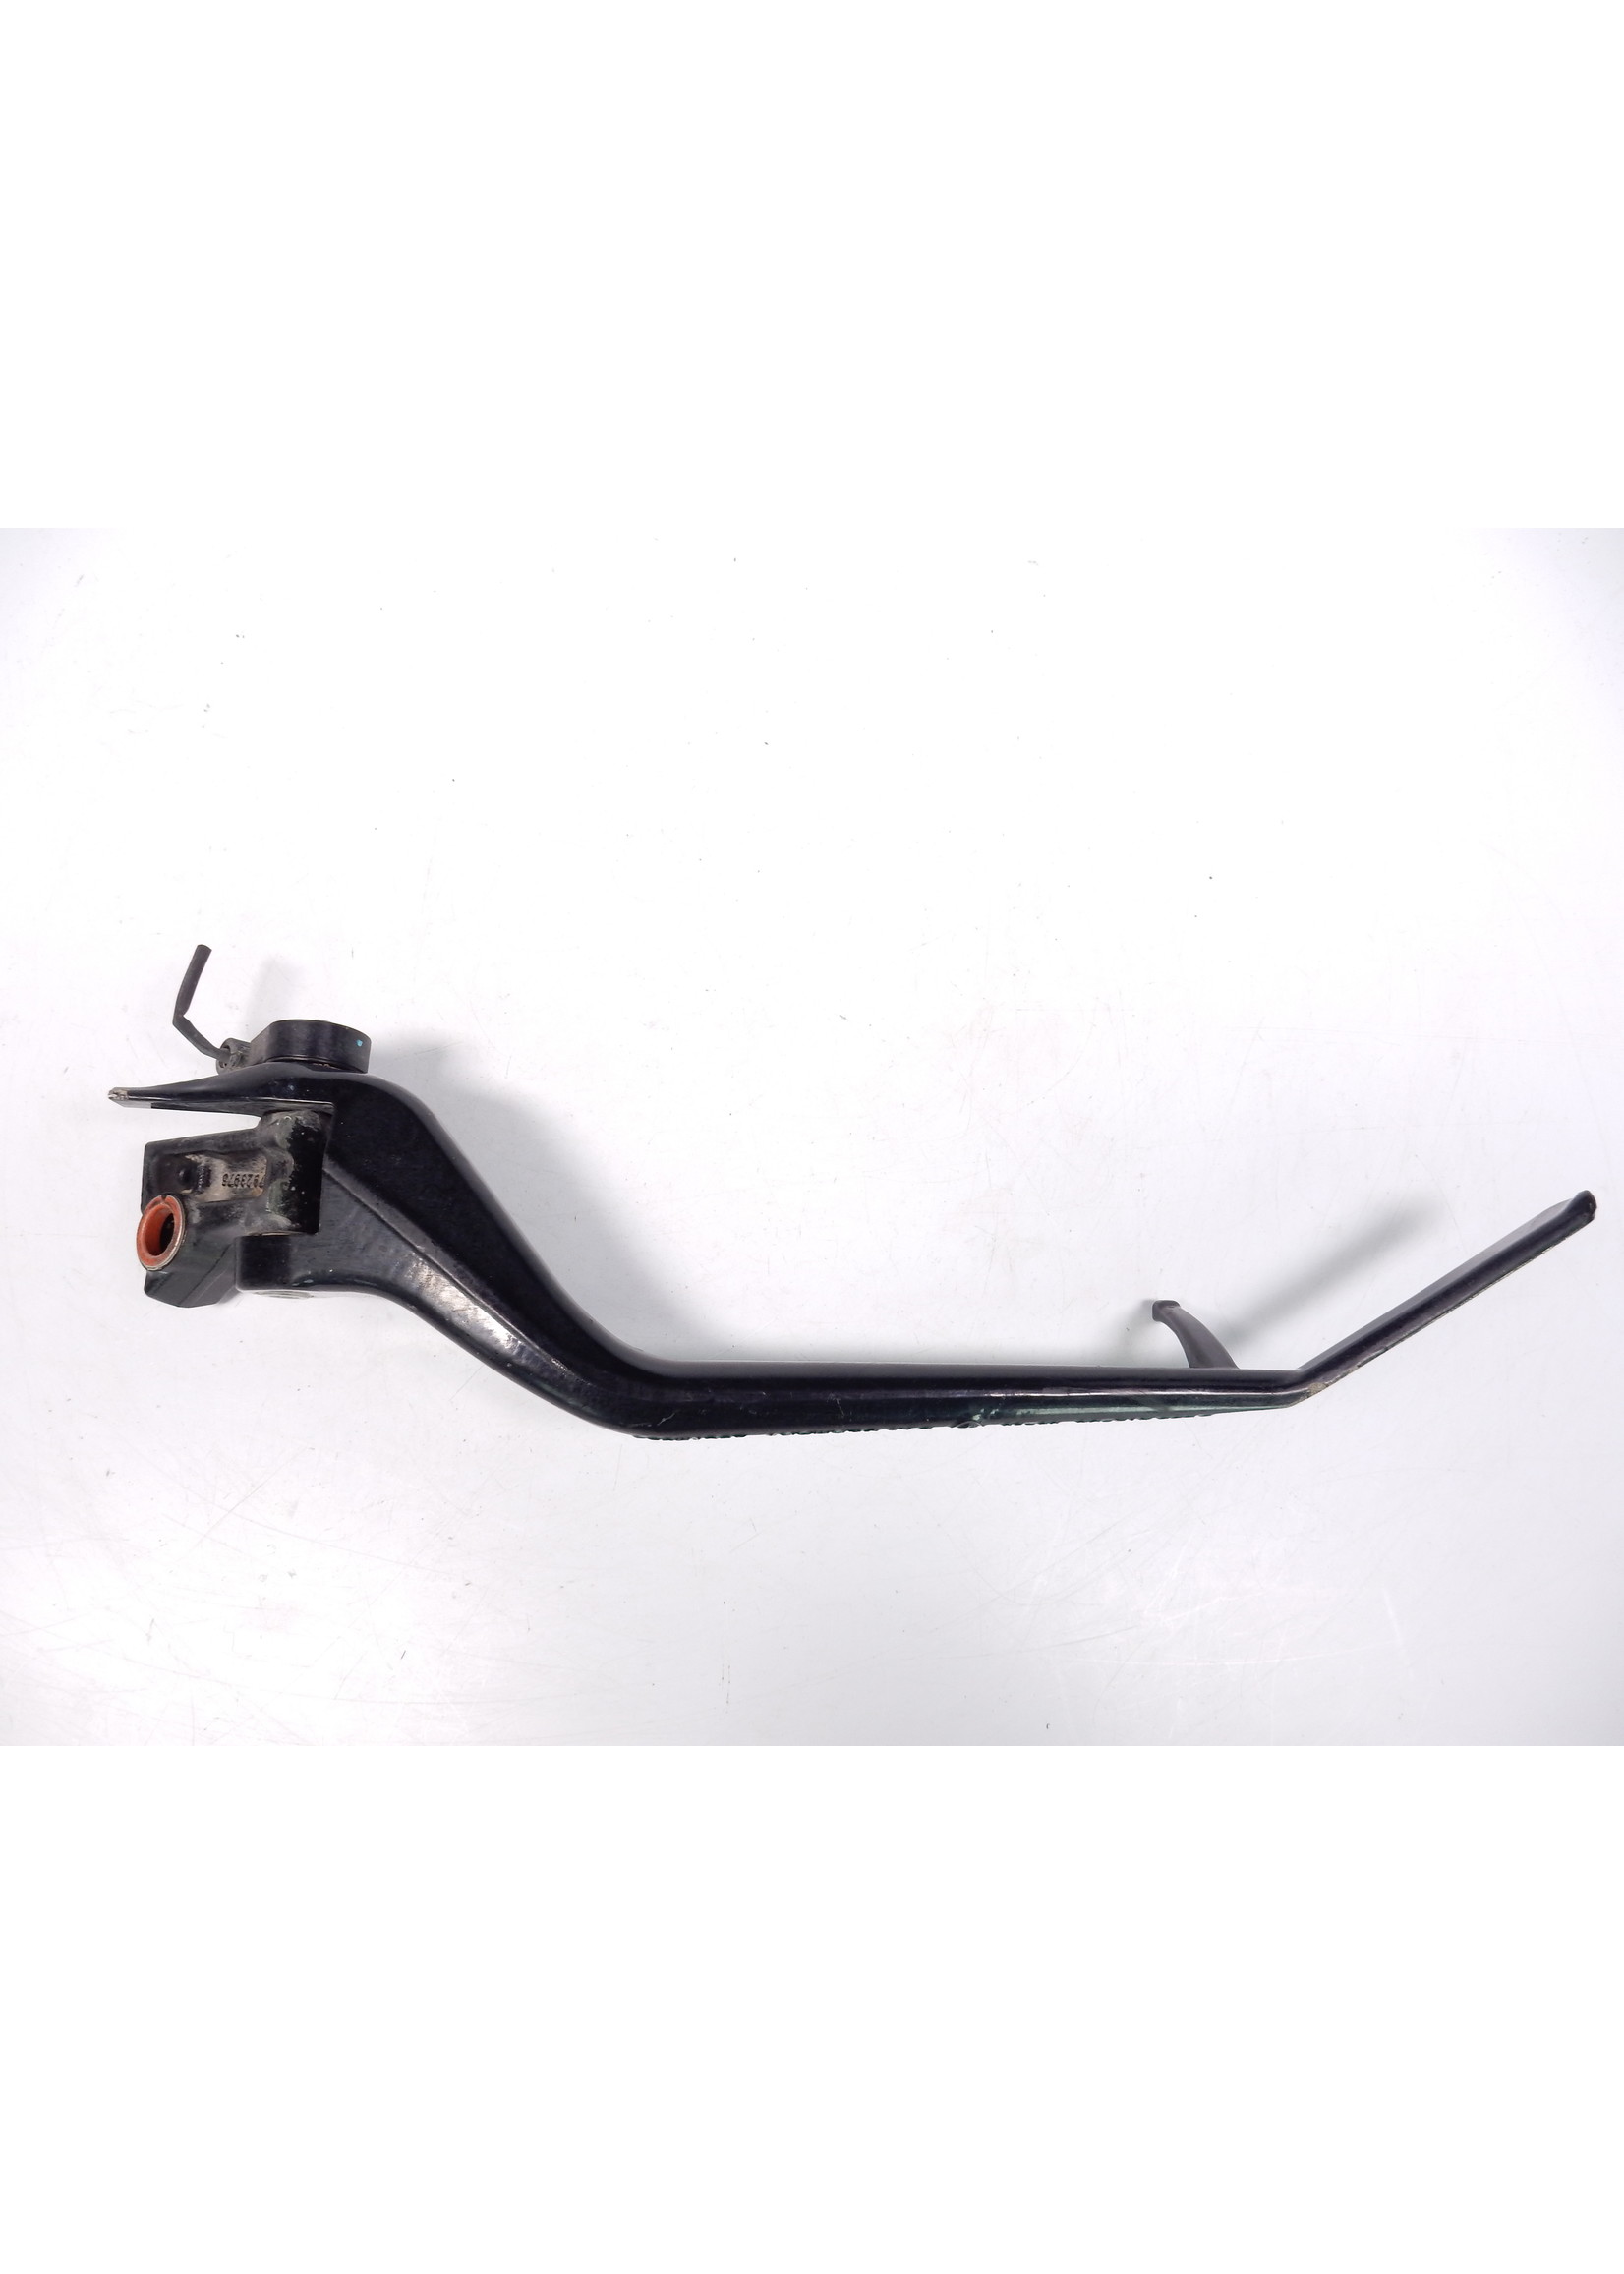 BMW BMW R18 Classic Side stand / Supporting bracket f side stand / Threaded bolt / Switch, side stand / 46539899212 / 46537923975 / 46539443378 / 61318388642